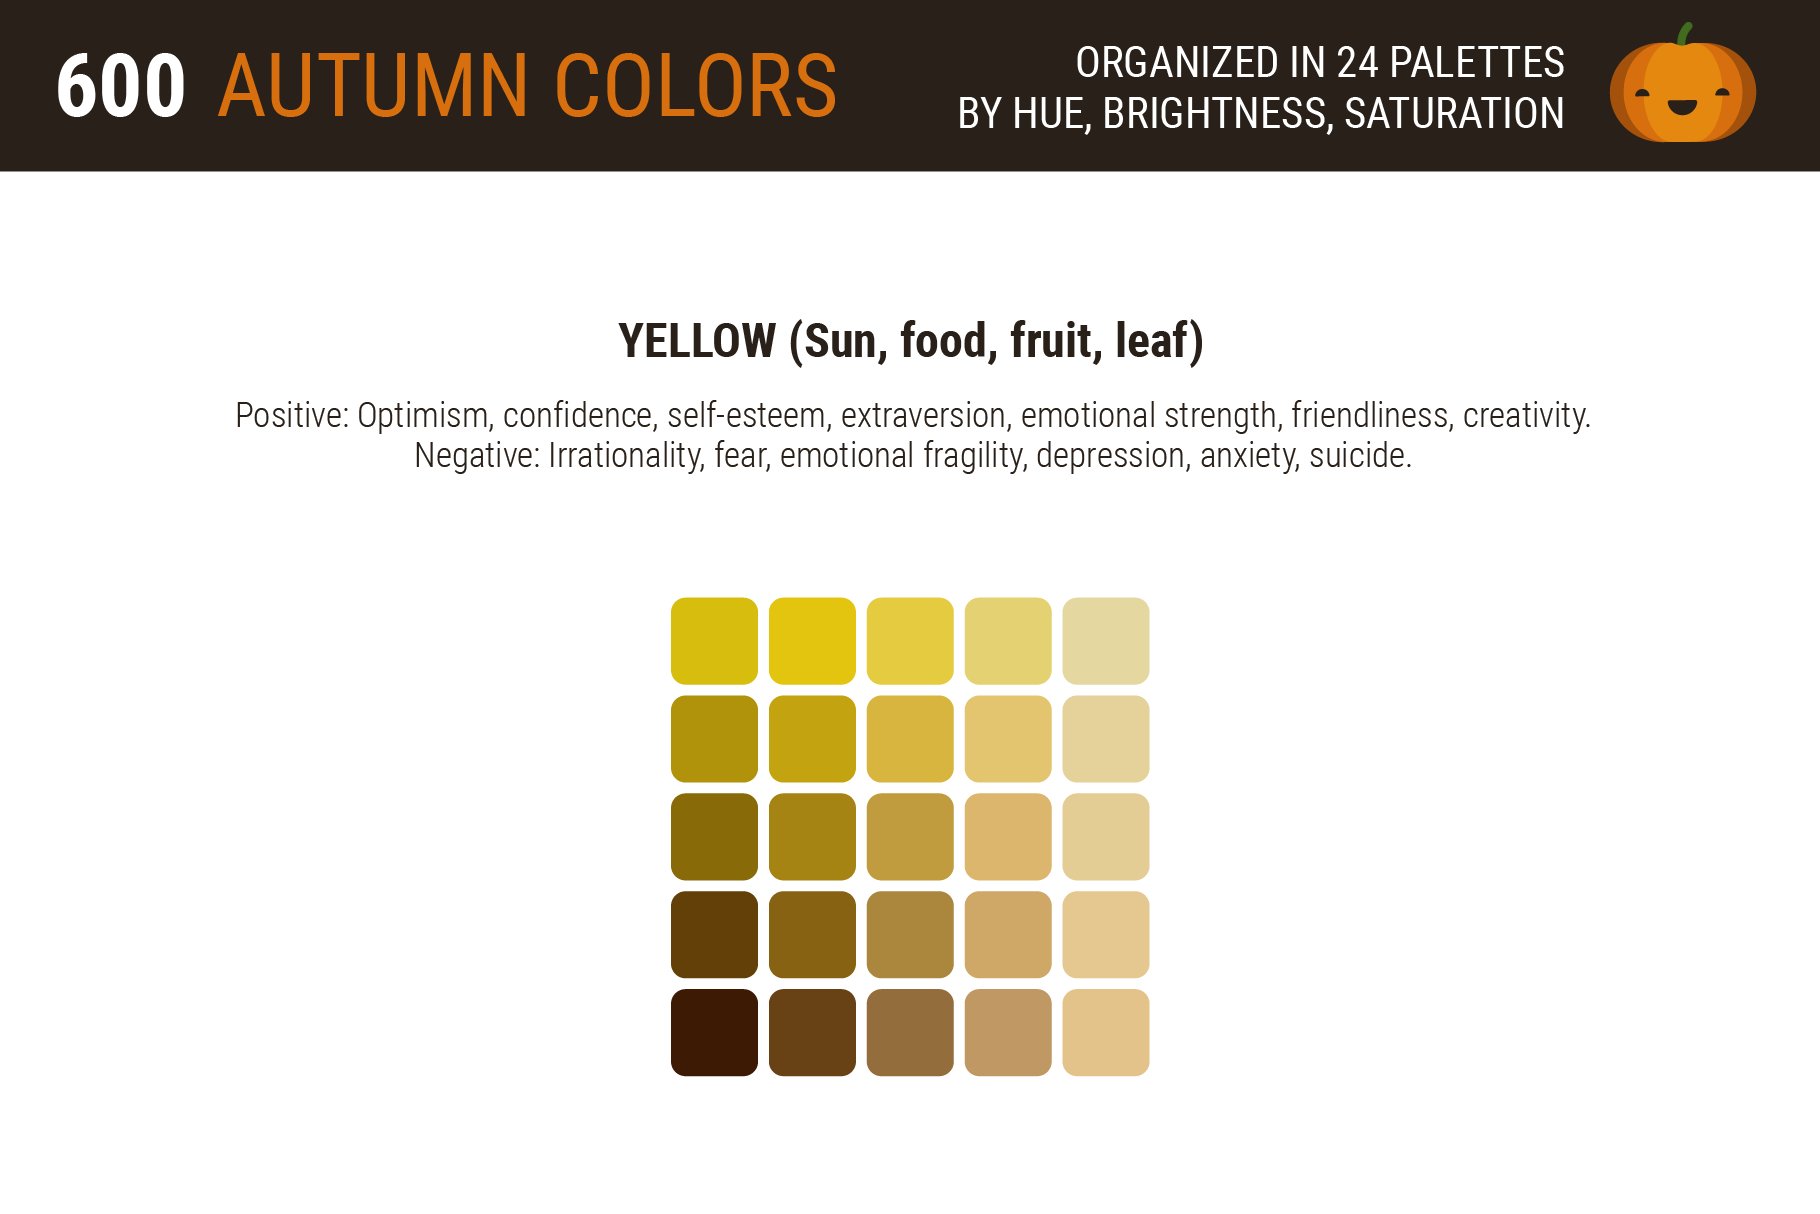 600colorswatches autumncolor 01 08 yellow 957